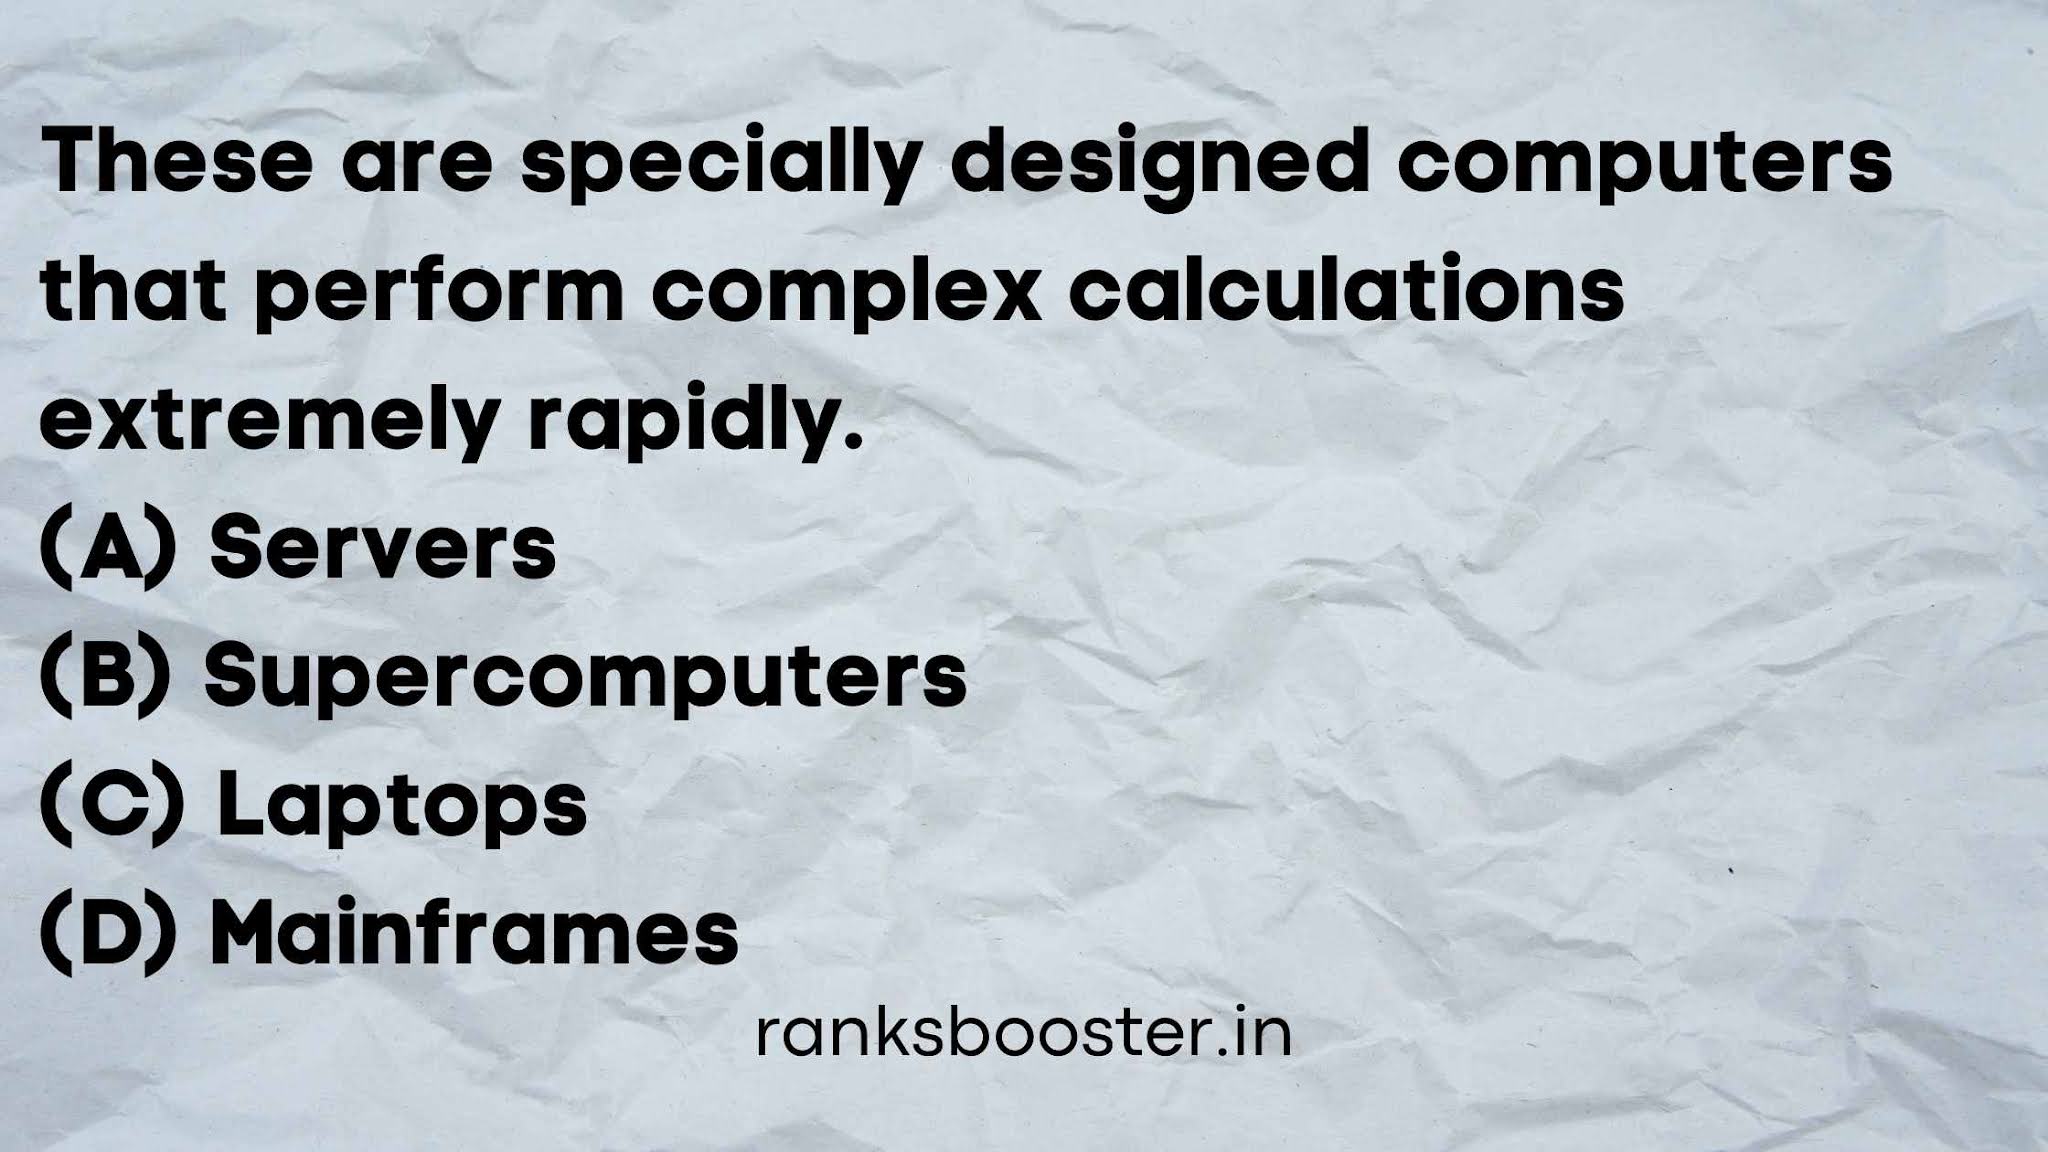 These are specially designed computers that perform complex calculations extremely rapidly. (A) Servers (B) Supercomputers (C) Laptops (D) Mainframes